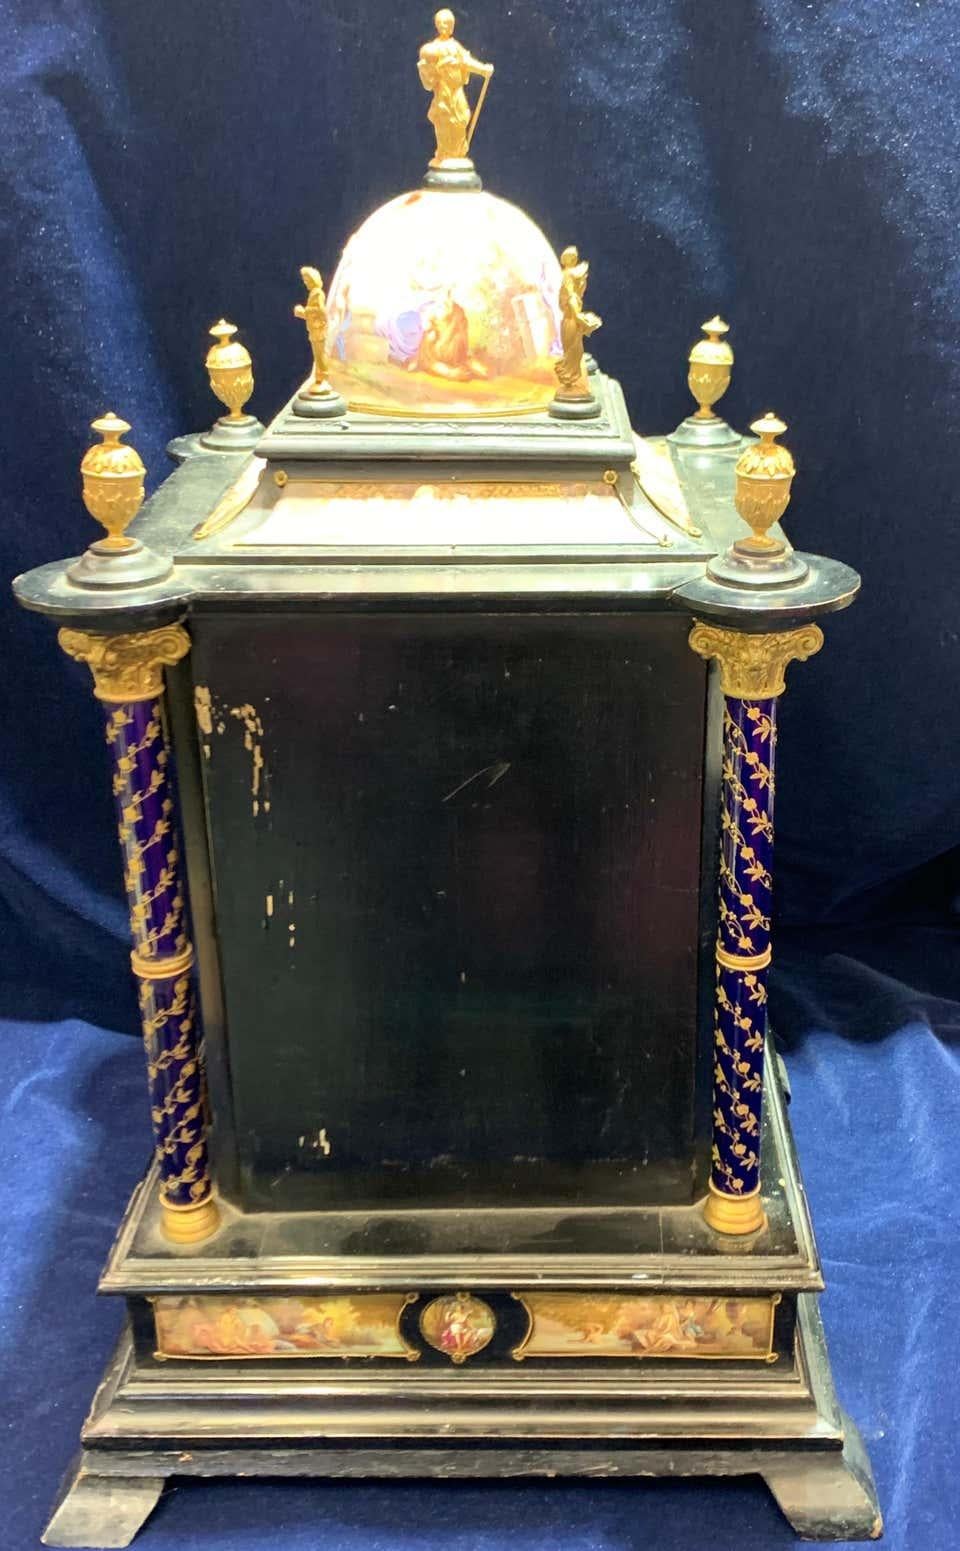 Austrian silver-gilt, wood & enamel clock cabinet table

Classical figures painted on a gilt diaper bottom. An enamel clock face, matching the corners. Columns made of Corinthian with painted florals with urns on top. Includes an opening back door